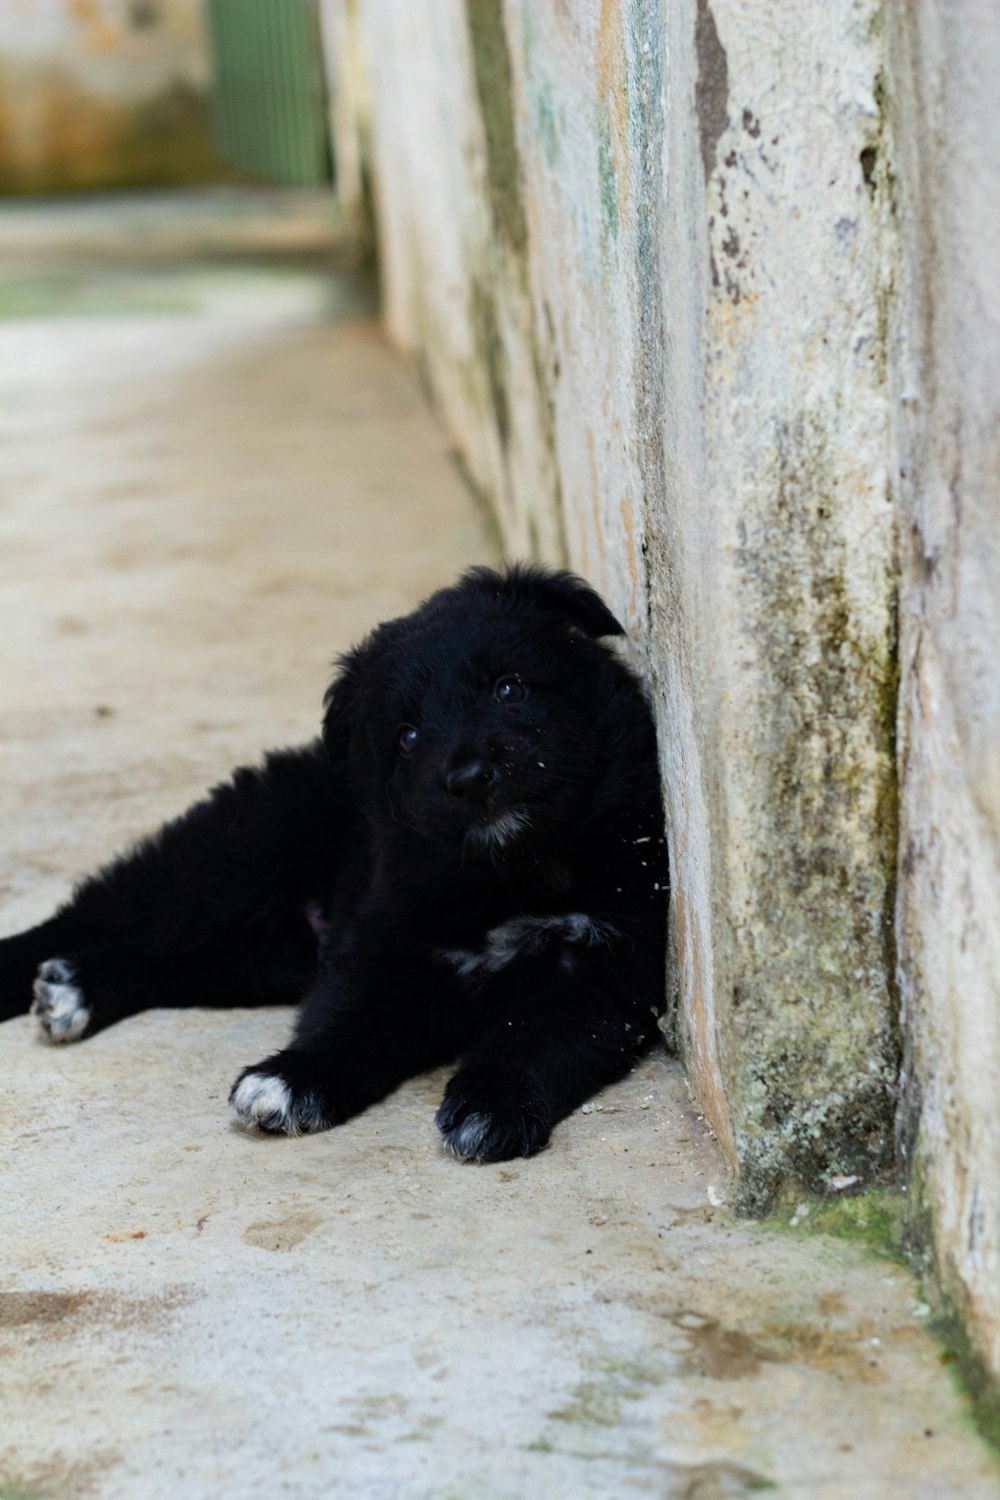 black and white short coated puppy lying on brown sand during daytime